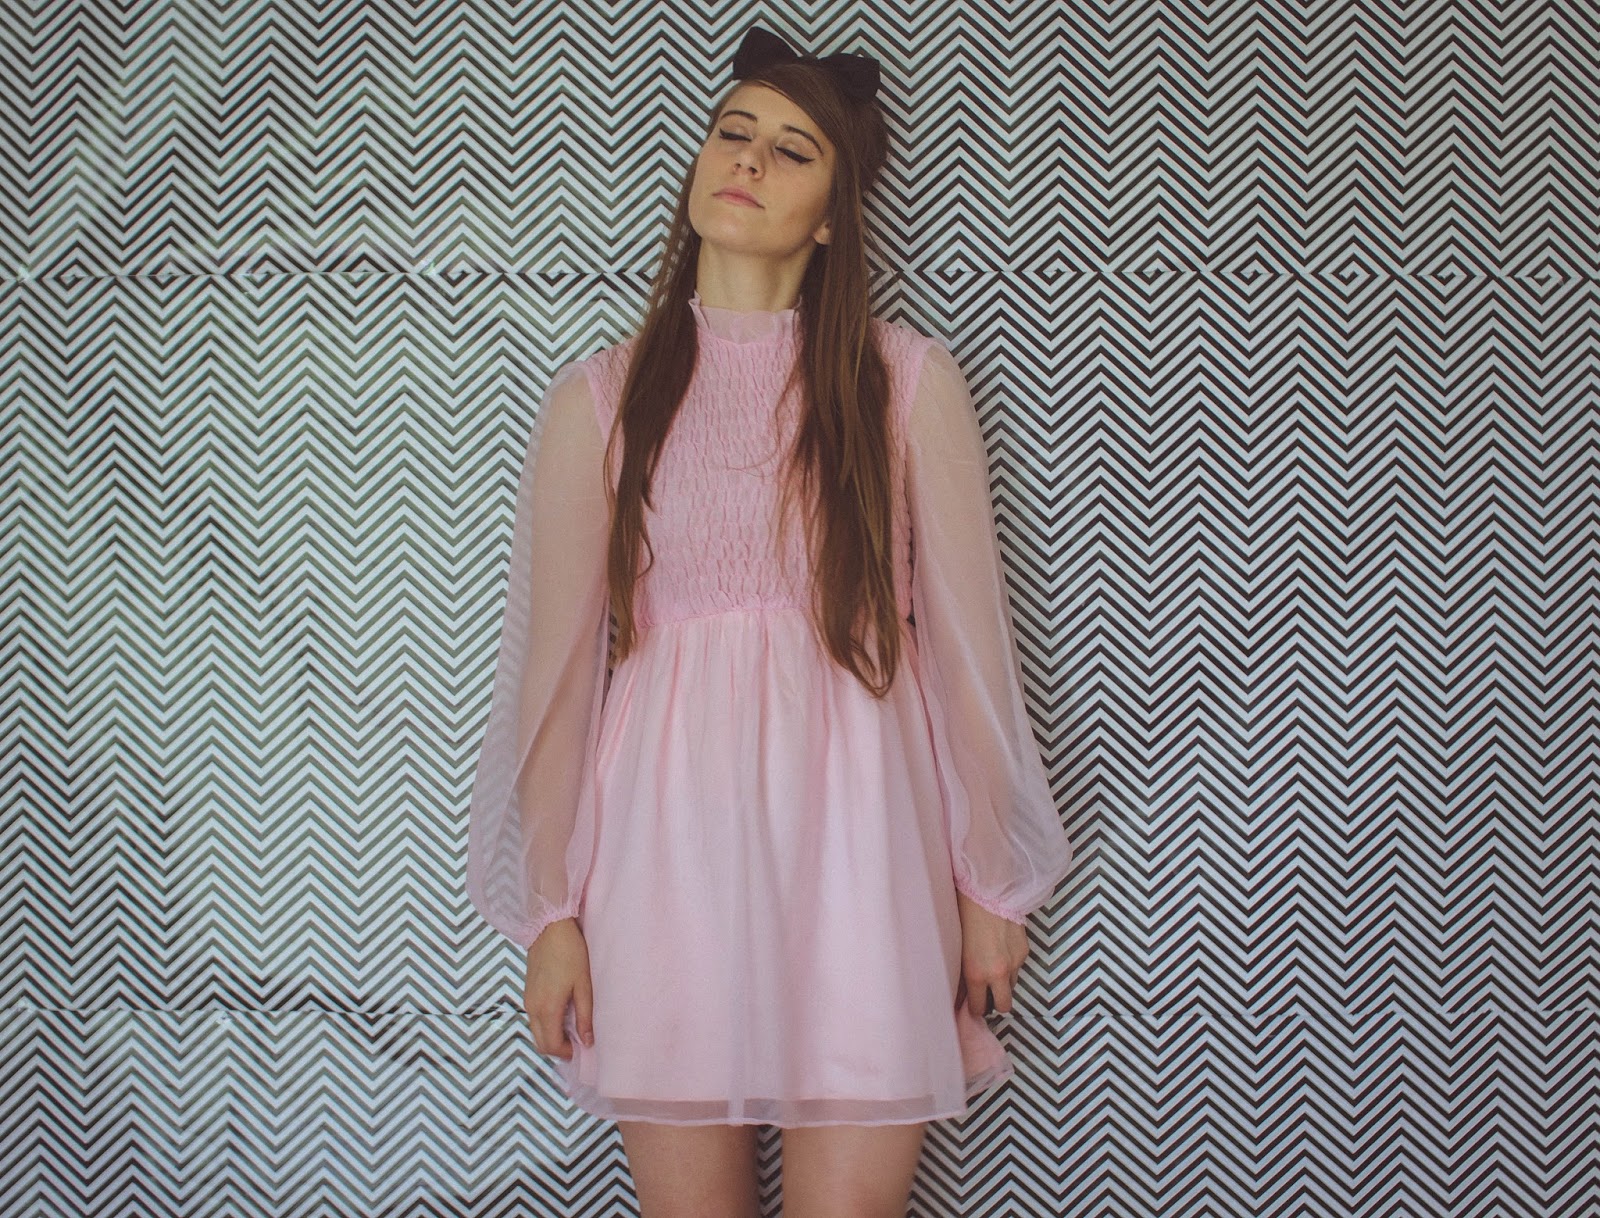 fashion, style, blogger, personal style blogger, movie blogger, pink shift dress, 60's style, socks and heels, bouffant, girly style, cute retro outfit